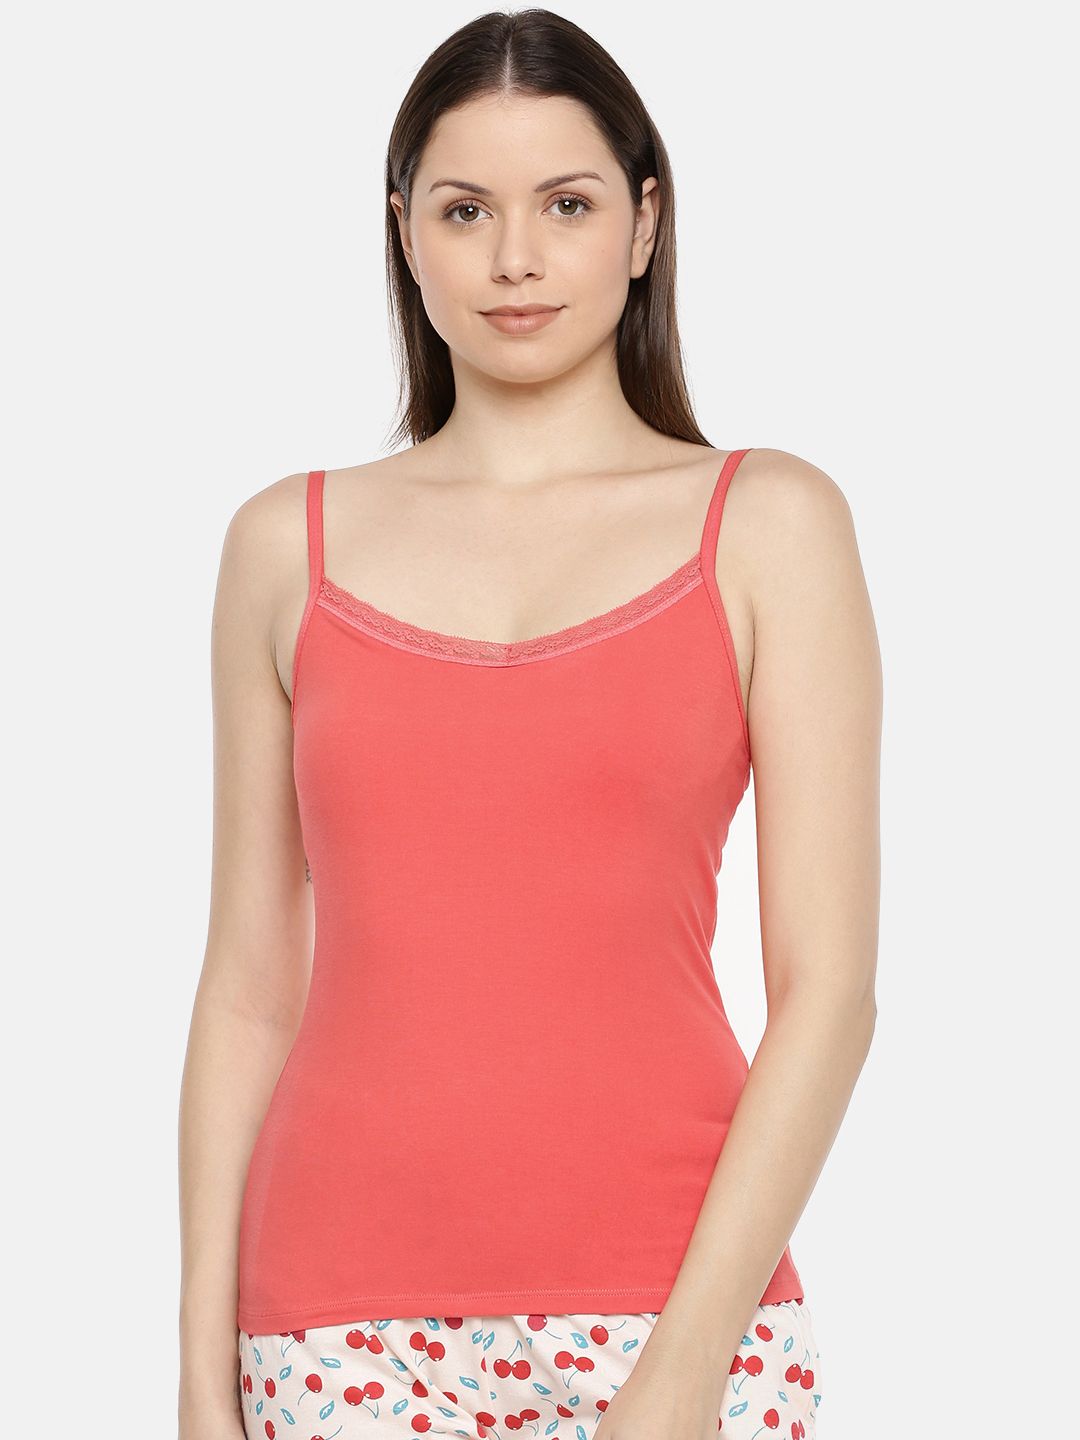 Camisole with Bust Support in Colour -Coral